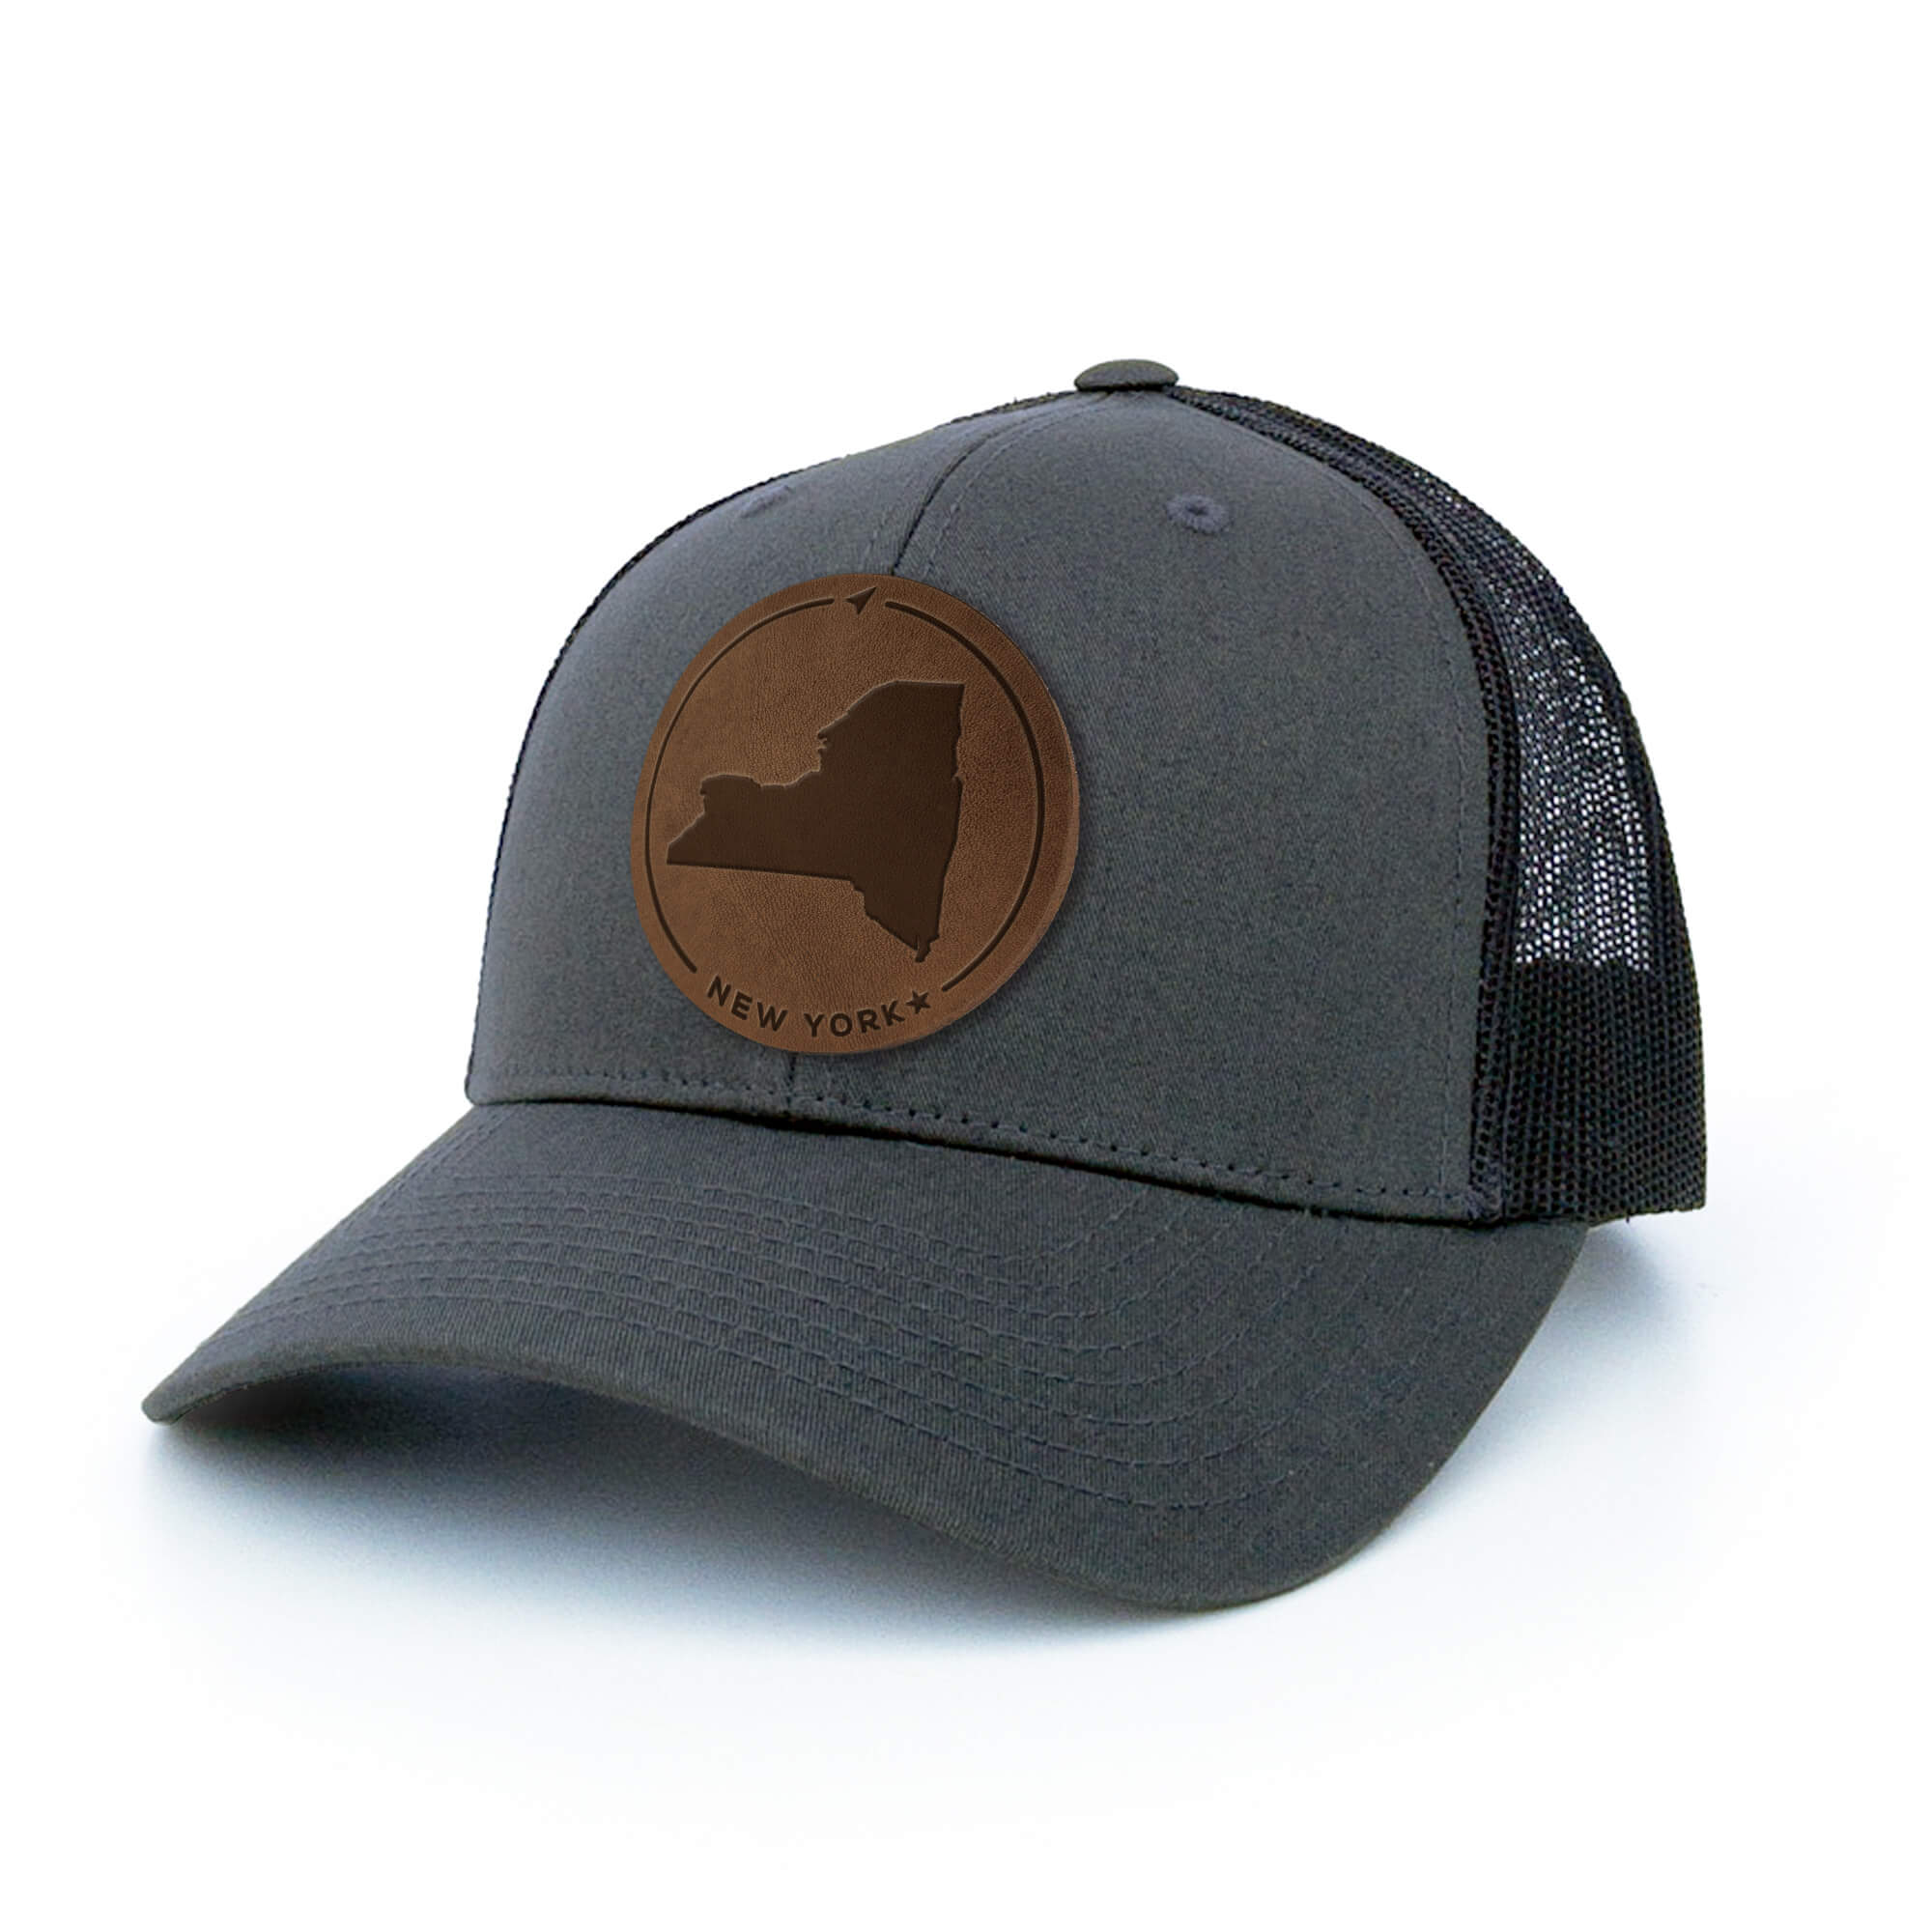 Charcoal trucker hat with full-grain leather patch of New York | BLACK-003-006, CHARC-003-006, NAVY-003-006, HGREY-003-006, MOSS-003-006, BROWN-003-006